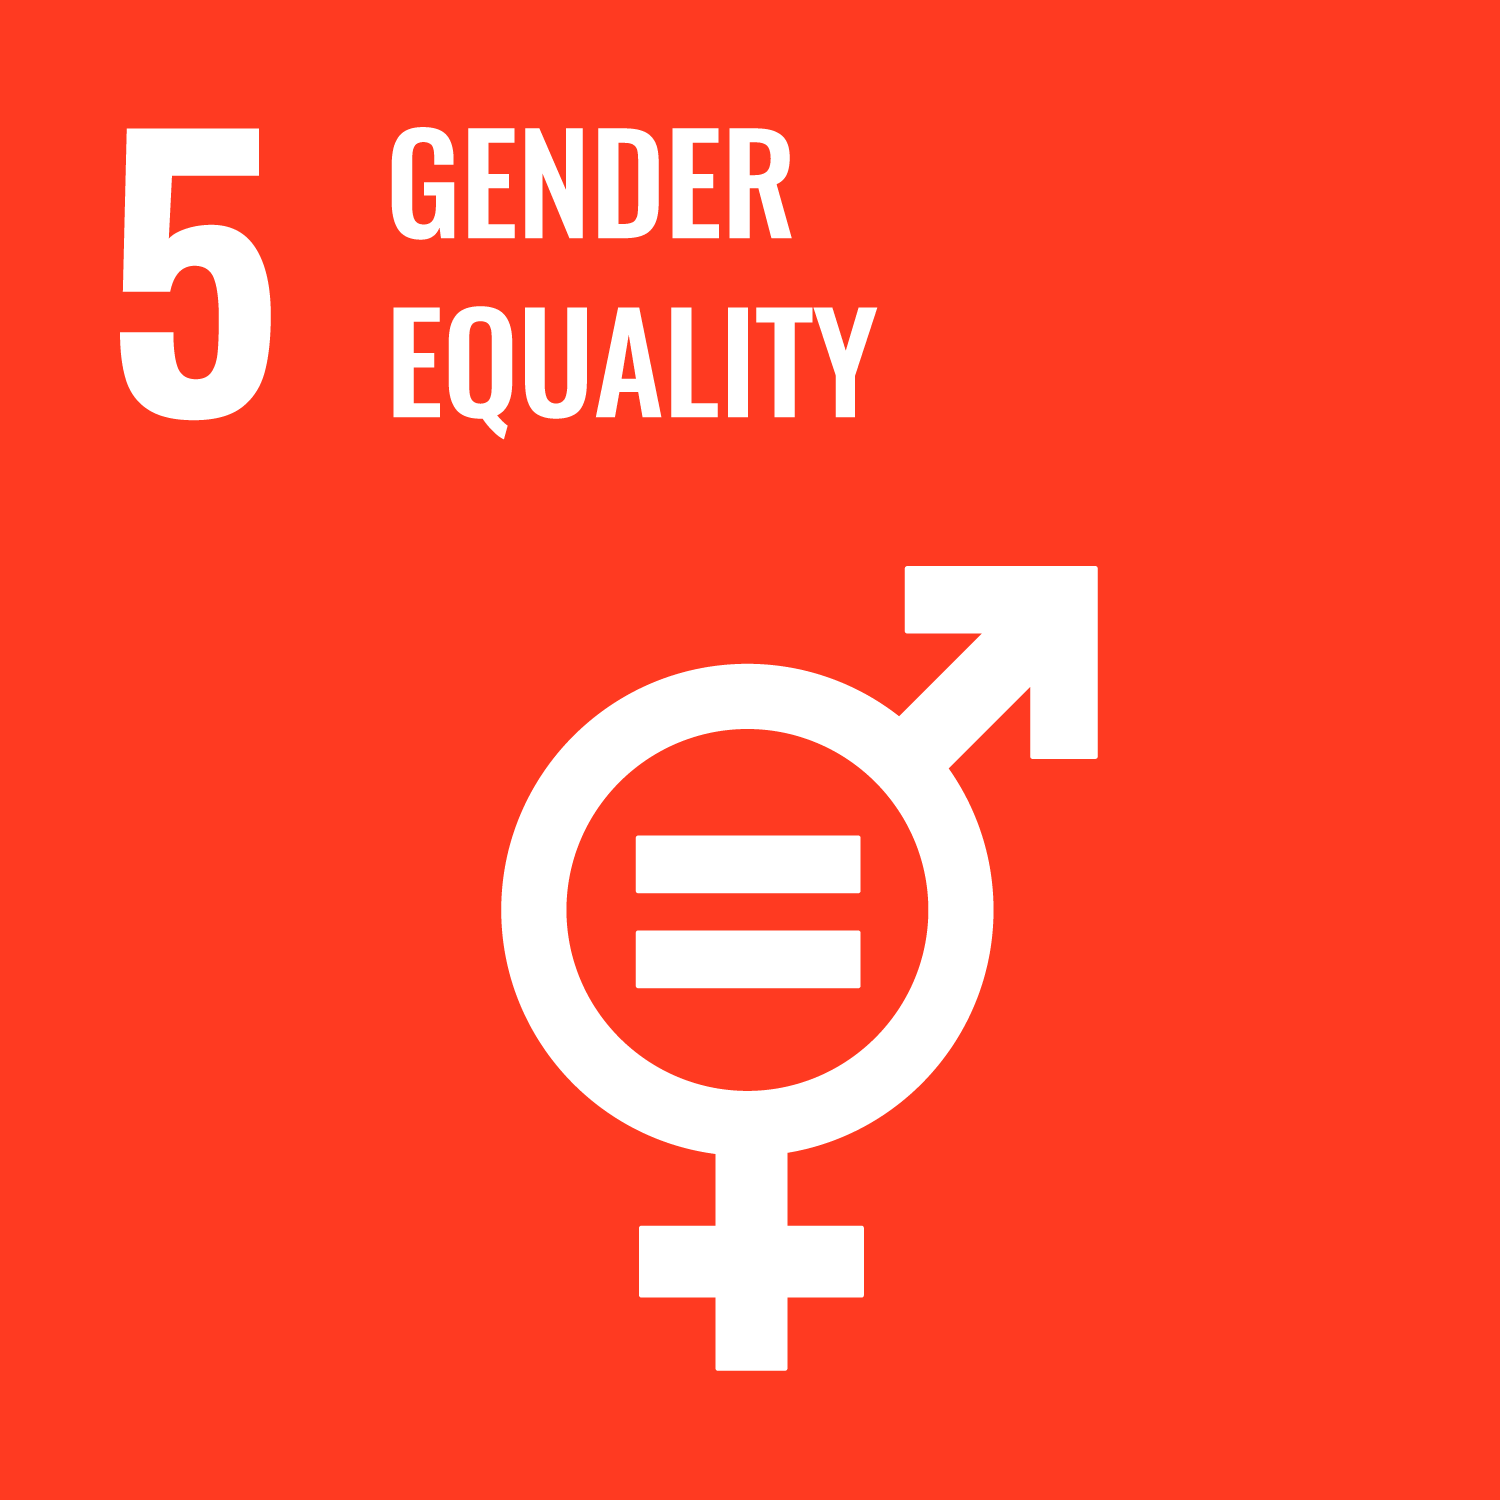 Sustainable Development Goal 5 – Gender Equality